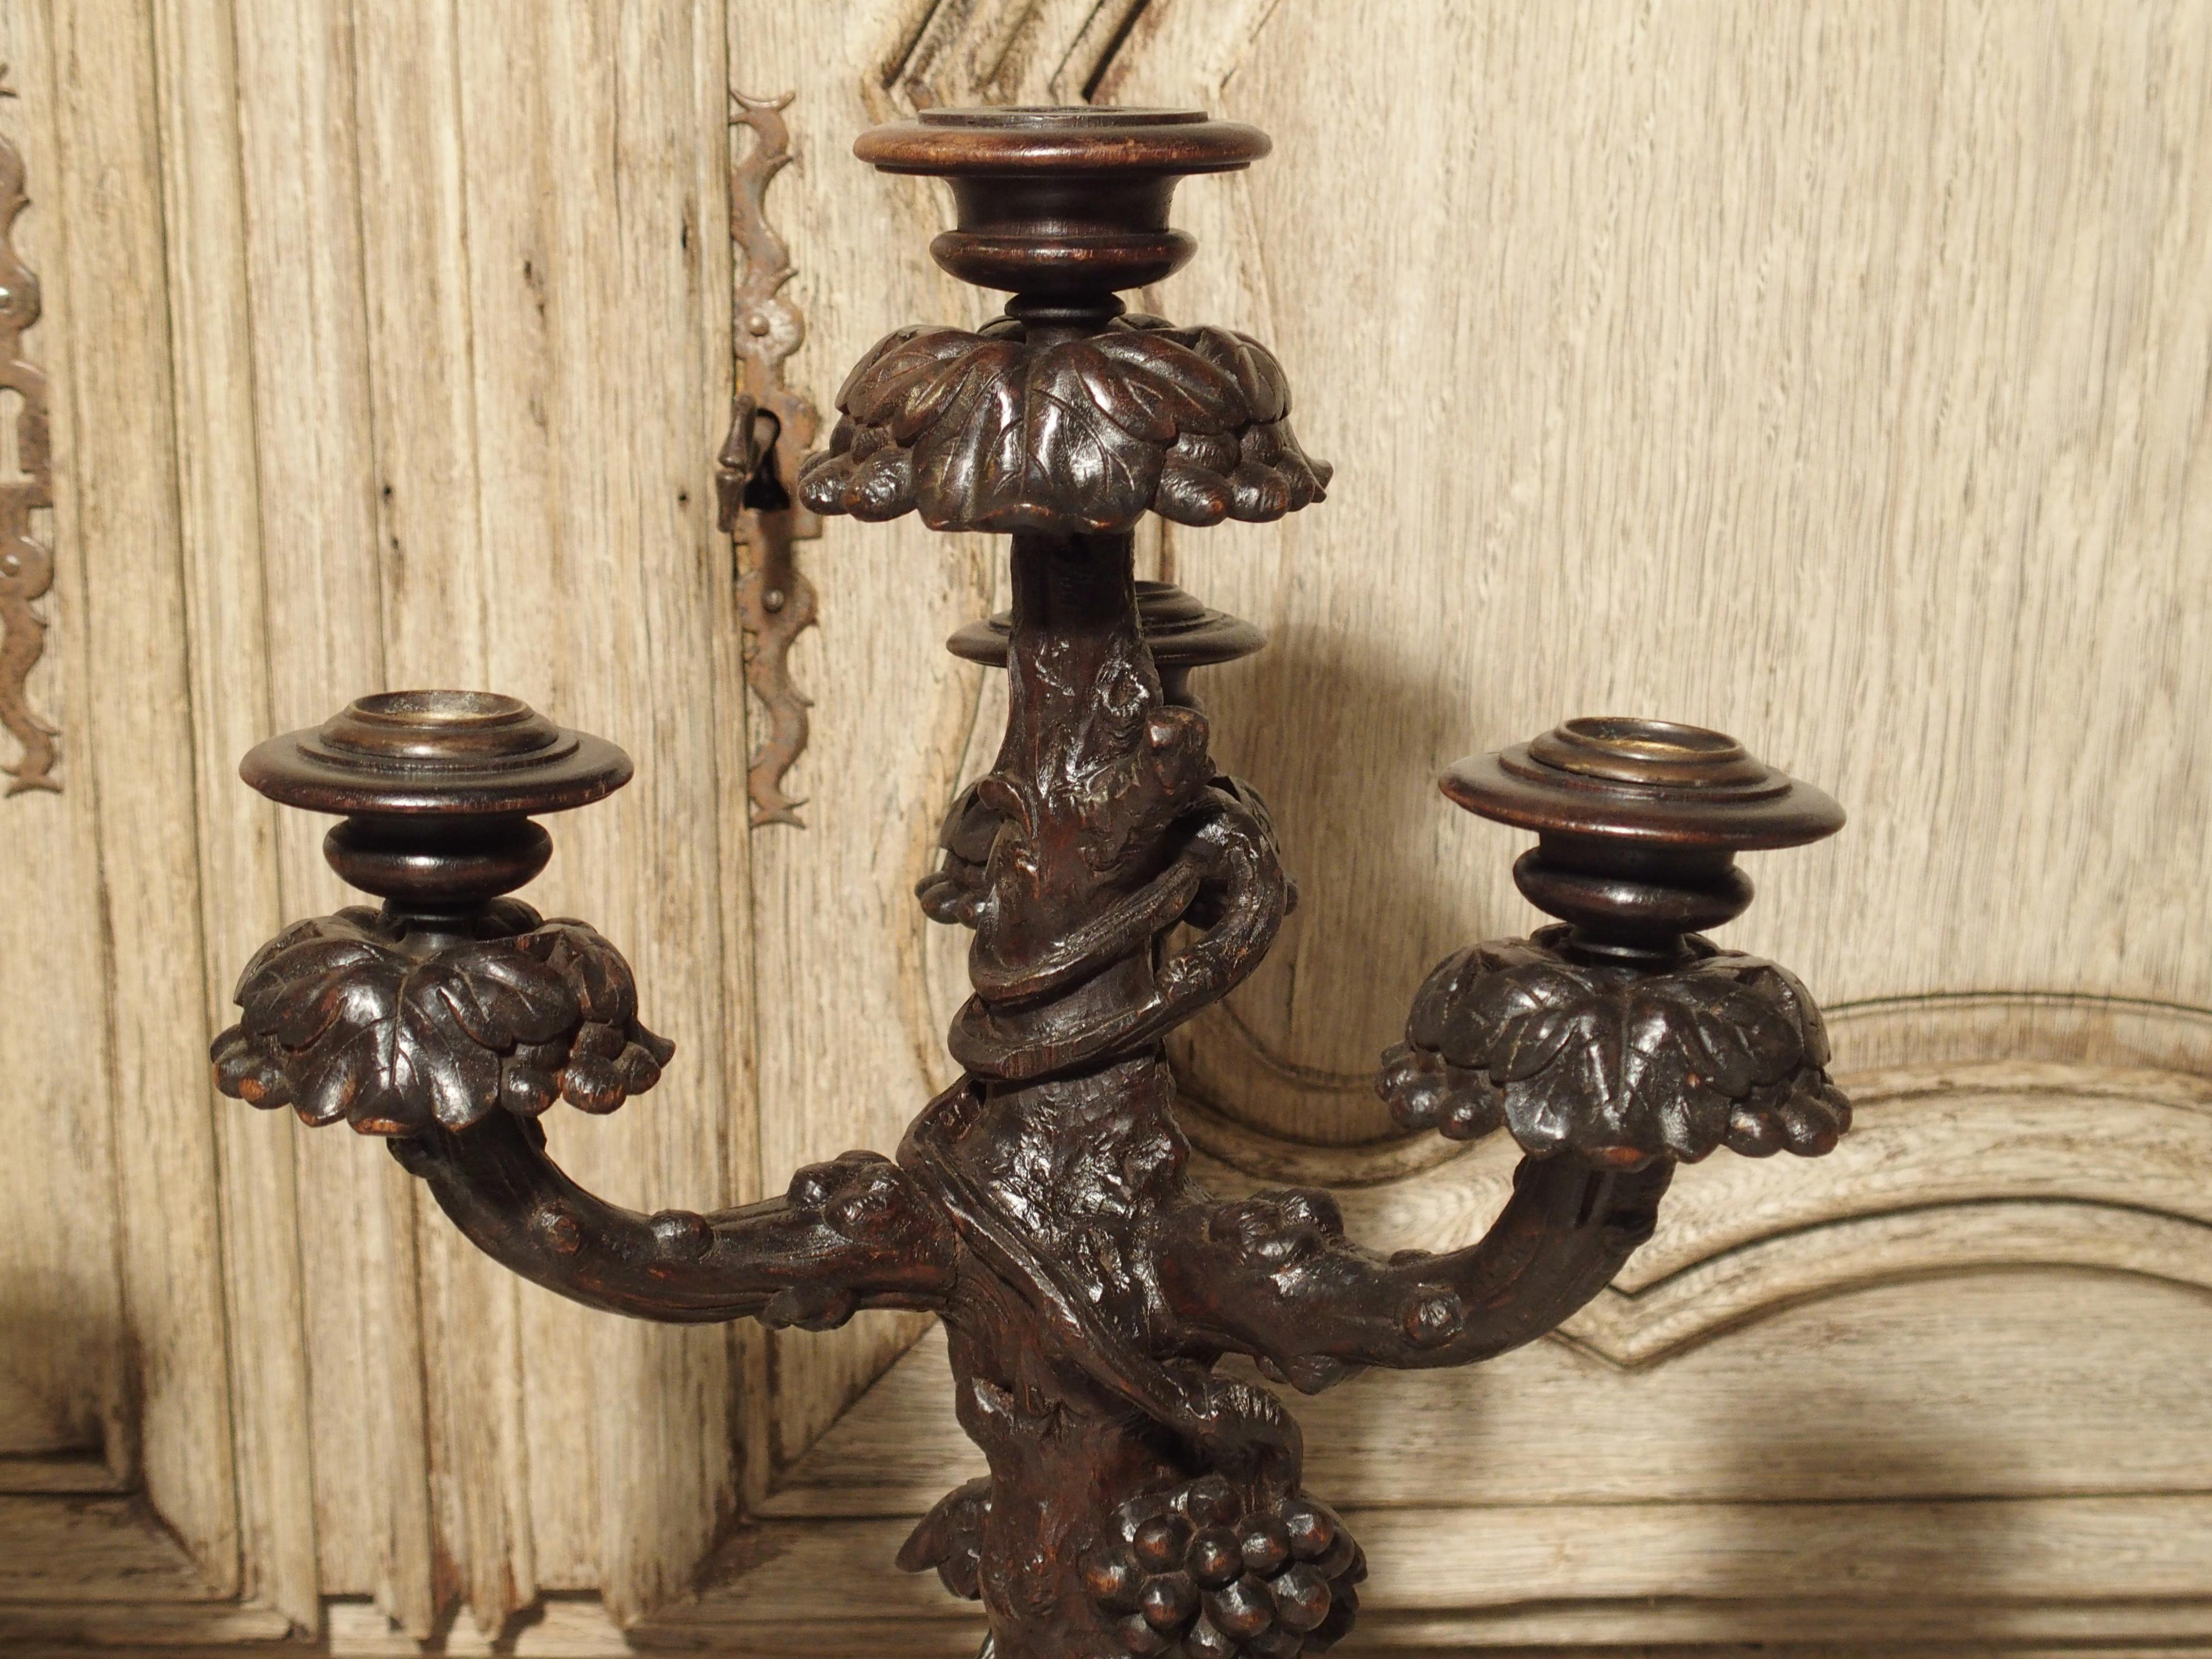 This unusual pair of Black Forest, wooden candelabras have foliate motifs of branches with bunches of grapes and leaves set into a wooded ground. The grain of the wood is deep and realistically carved. There are four candle cups on each candelabra